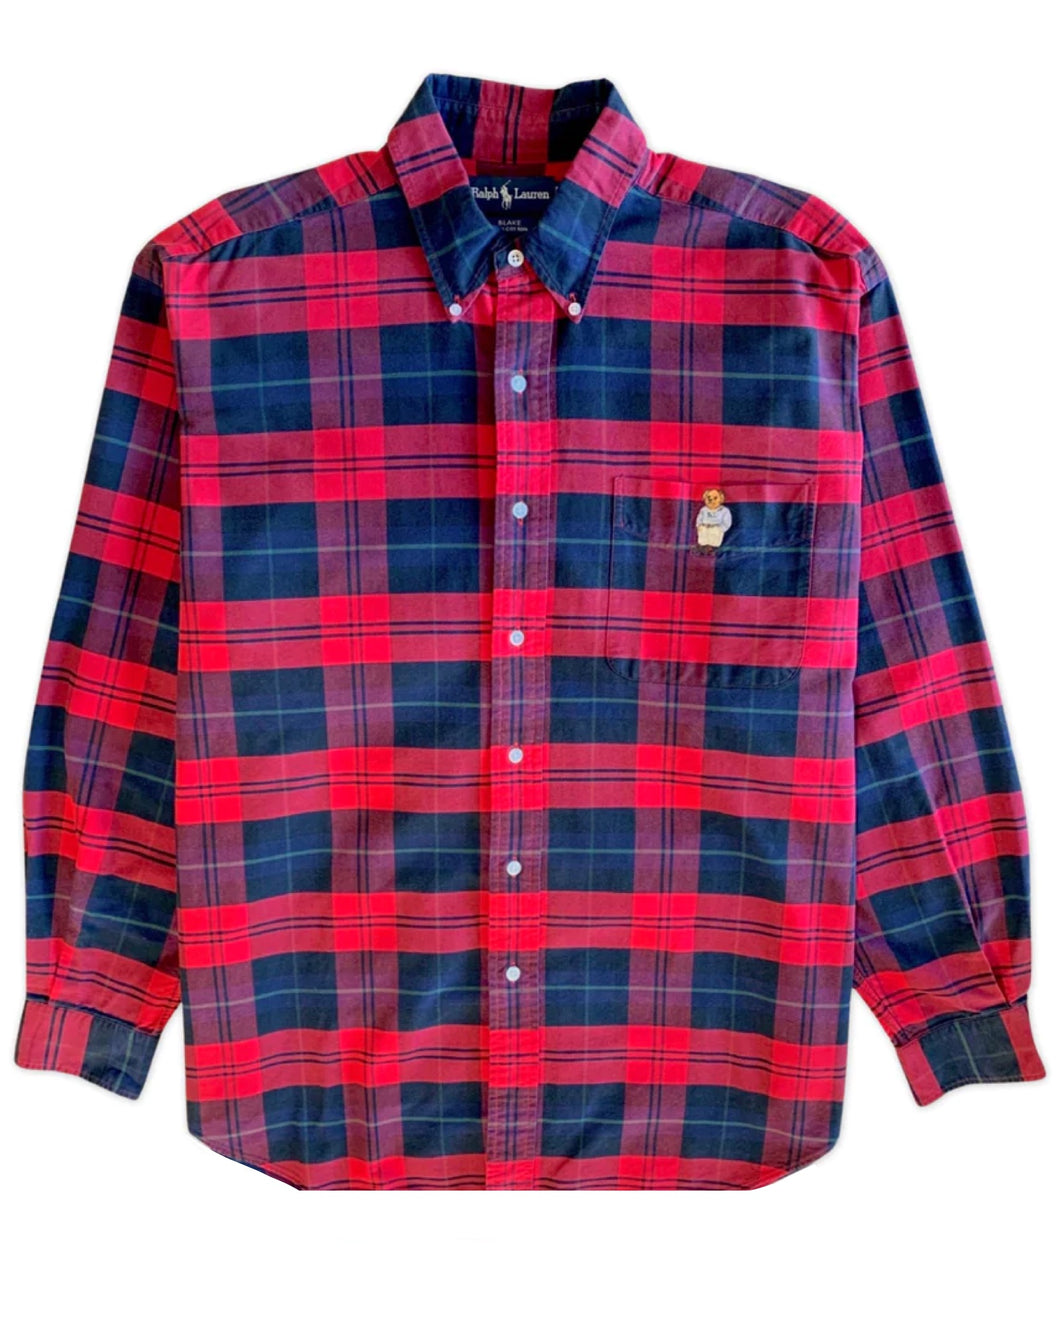 Ralph Lauren ⏐ Vintage Polo Bear Long Sleeve Mens Shirt in Red Plaid <br /> Size XL